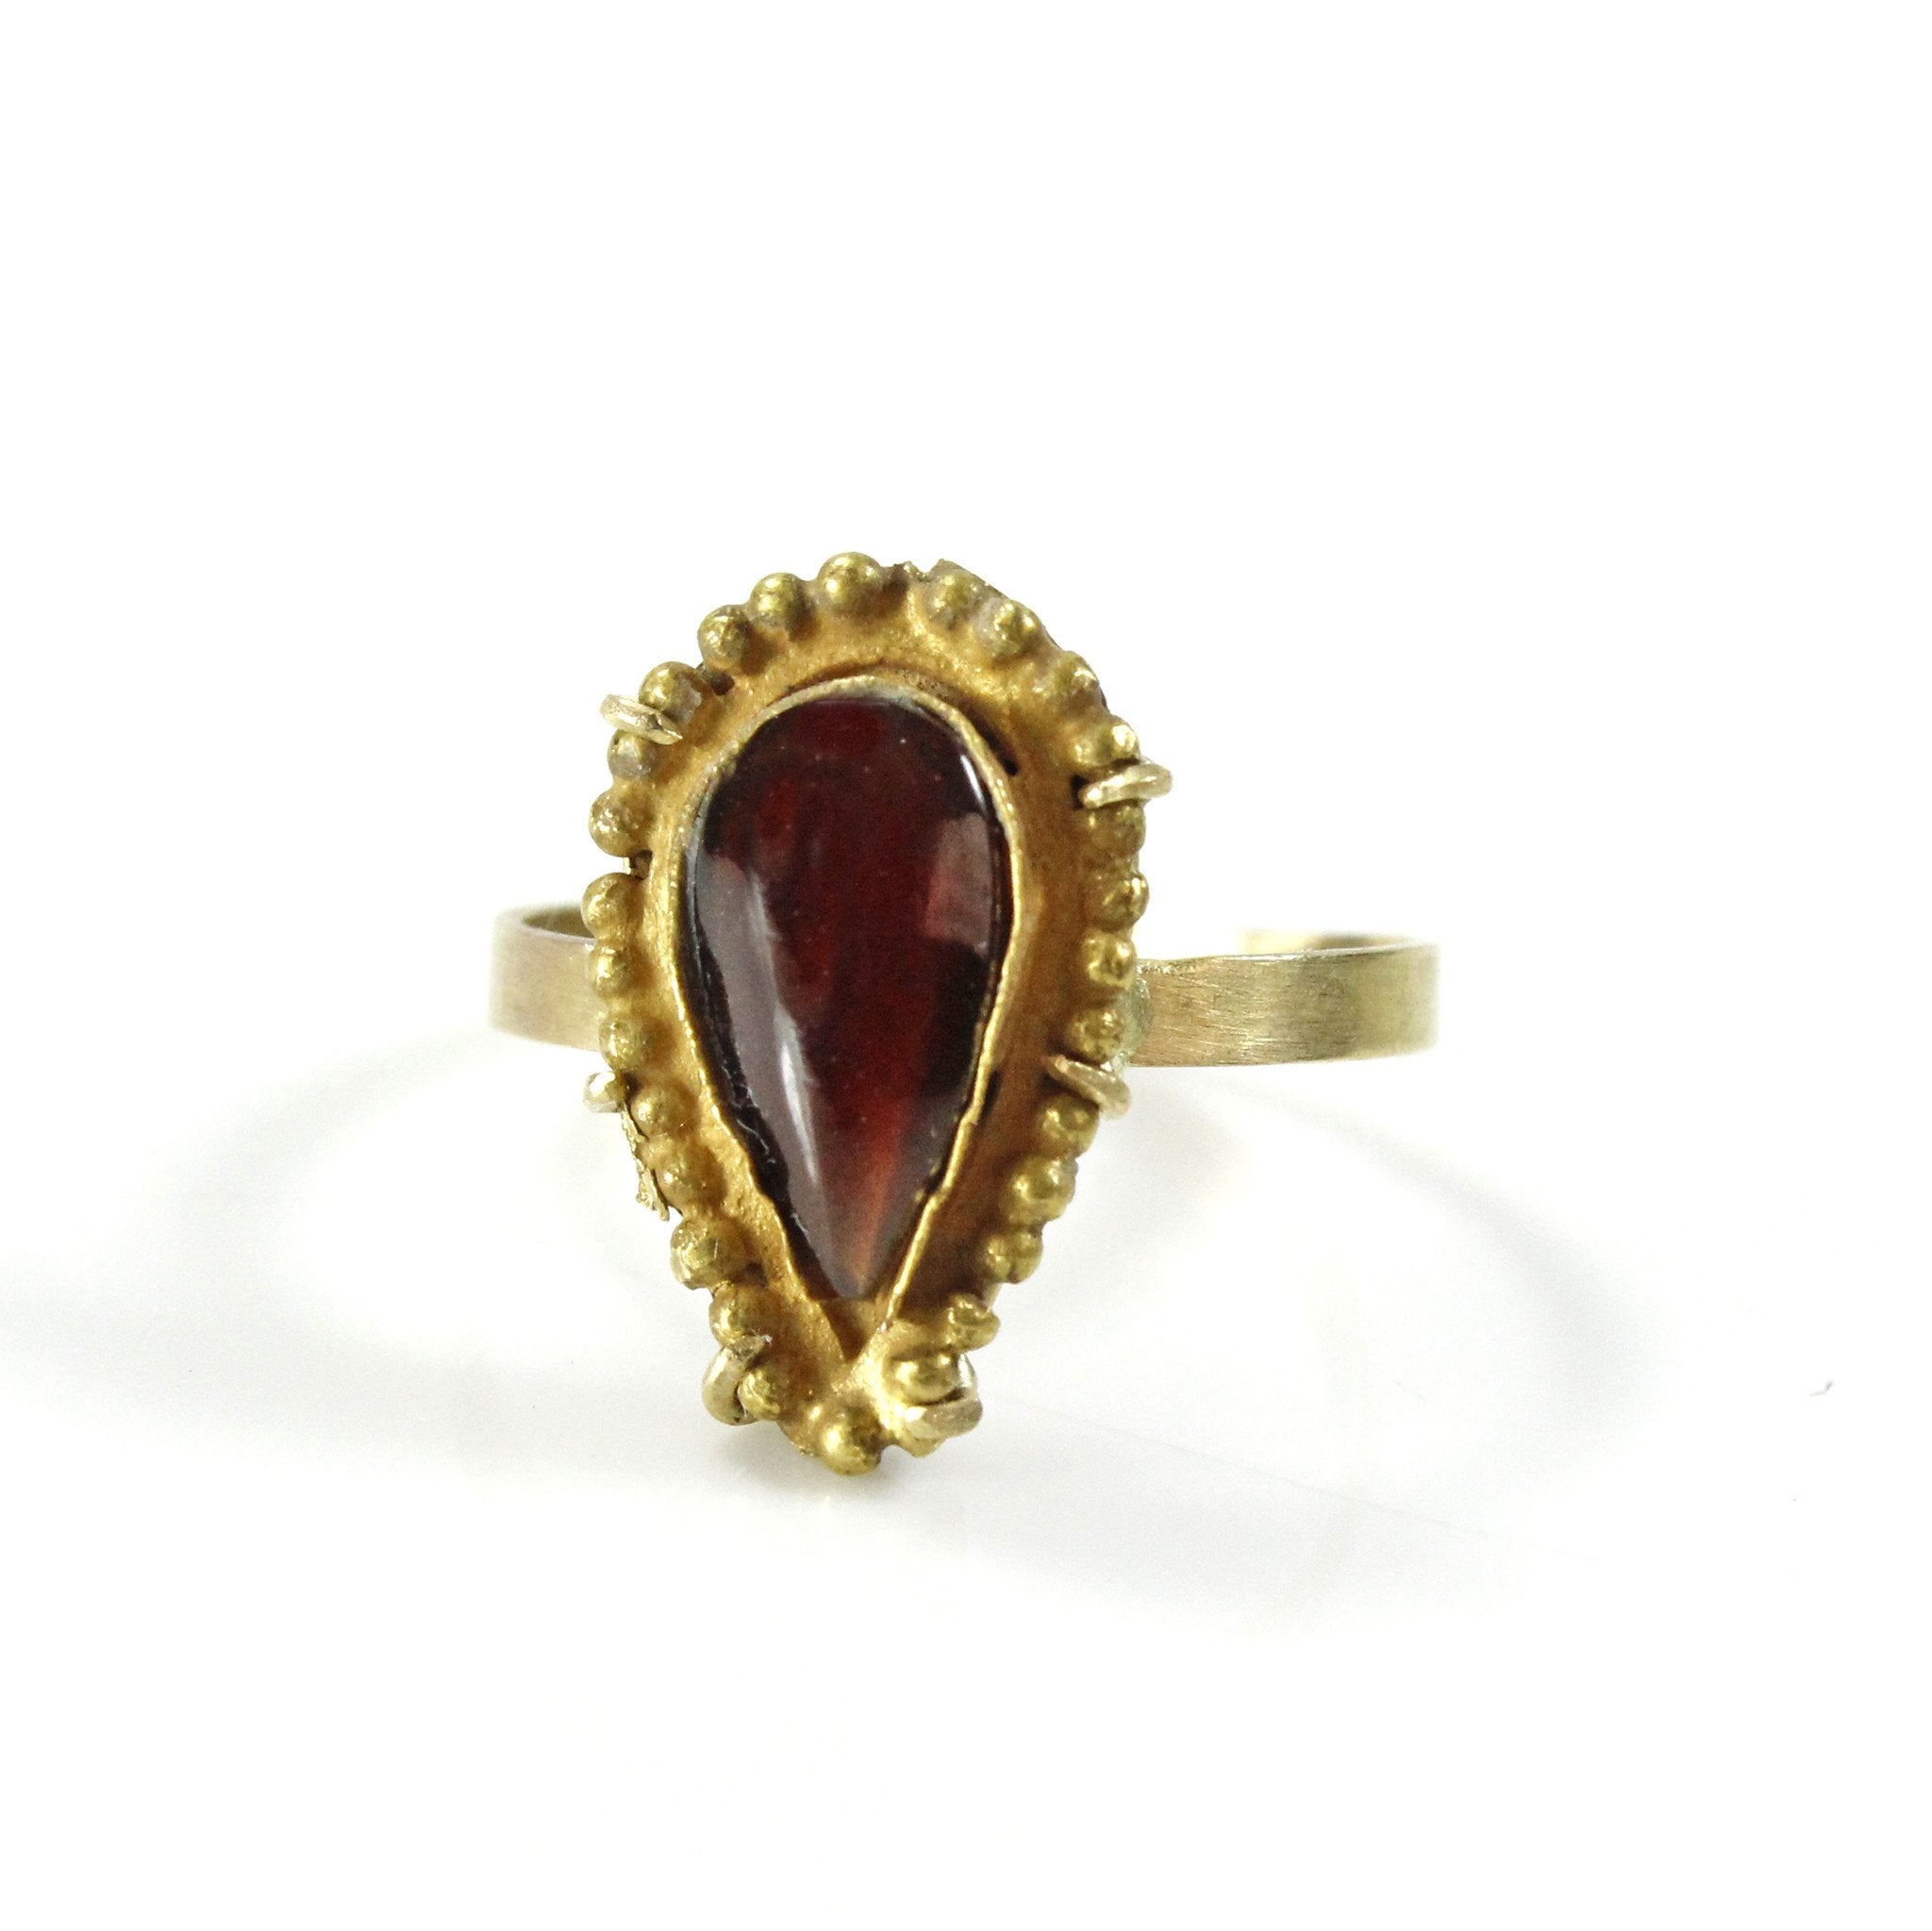 A Parthian Gold & Garnet Ring, ca. 2nd - 1st century BC - Sands of Time ...